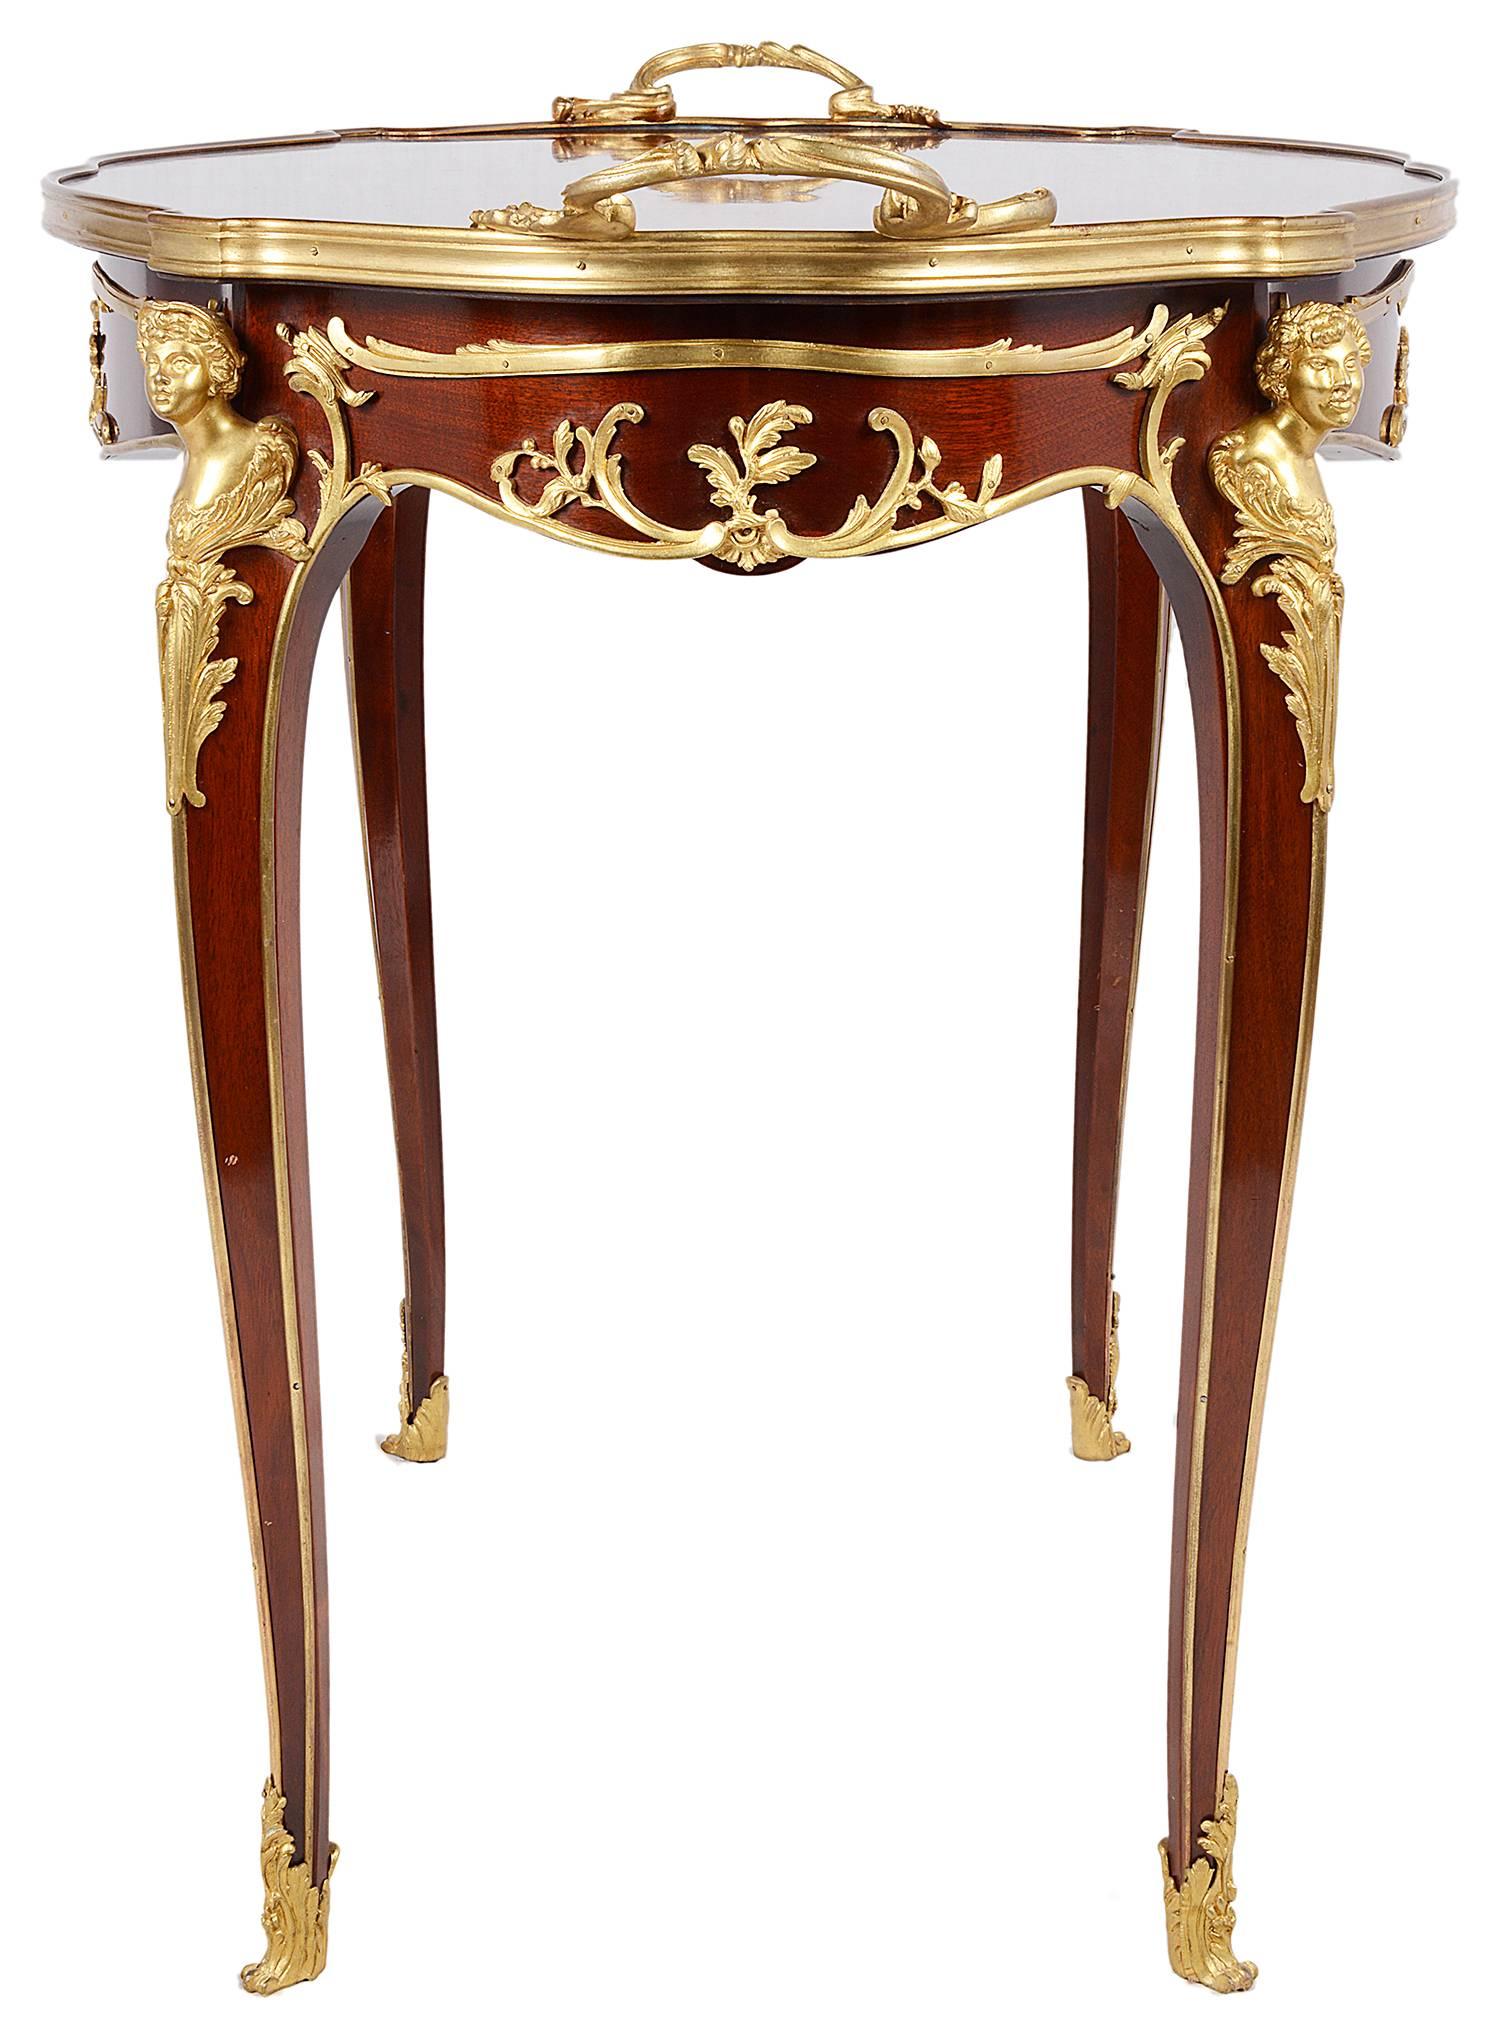 A good quality late 19th century French gilded ormolu-mounted centre table. The top having quartered veneers, rococo style mounts, with monopodia supports to the cabriole legs, terminating in scrolling ormolu feet.